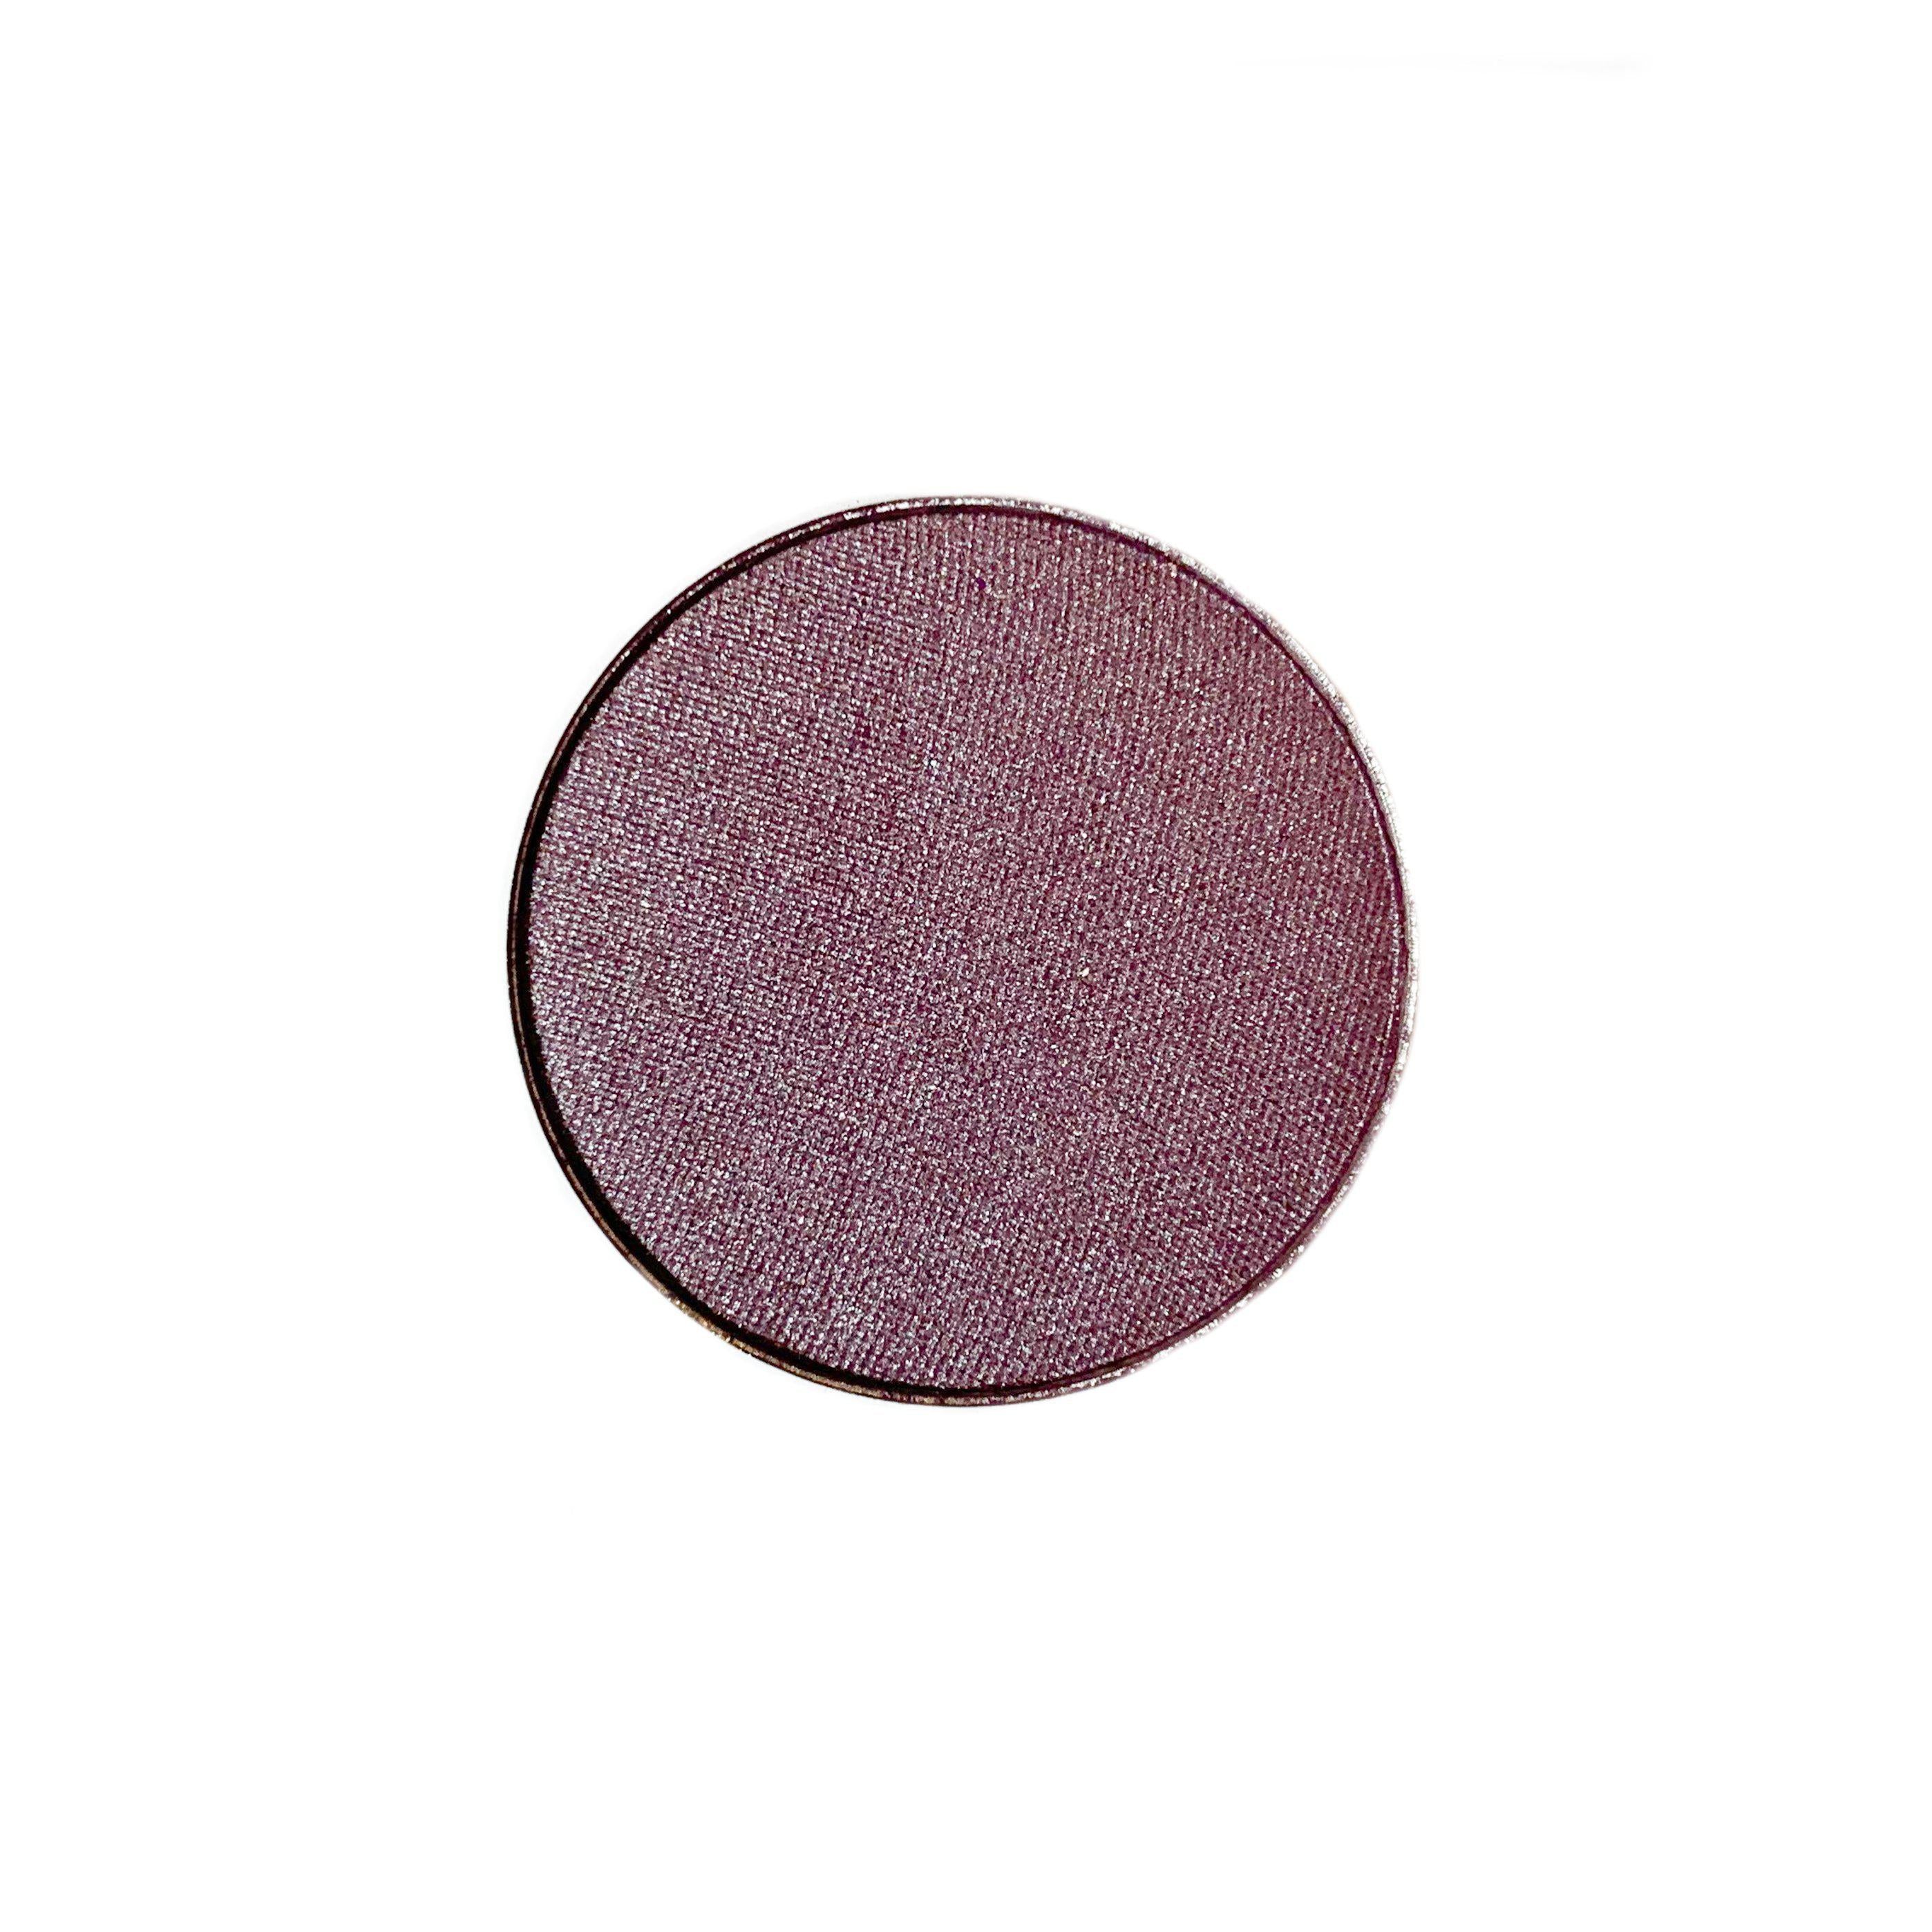 Pressed Eyeshadow-Makeup-withSimplicity-Dahlia-withSimplicity